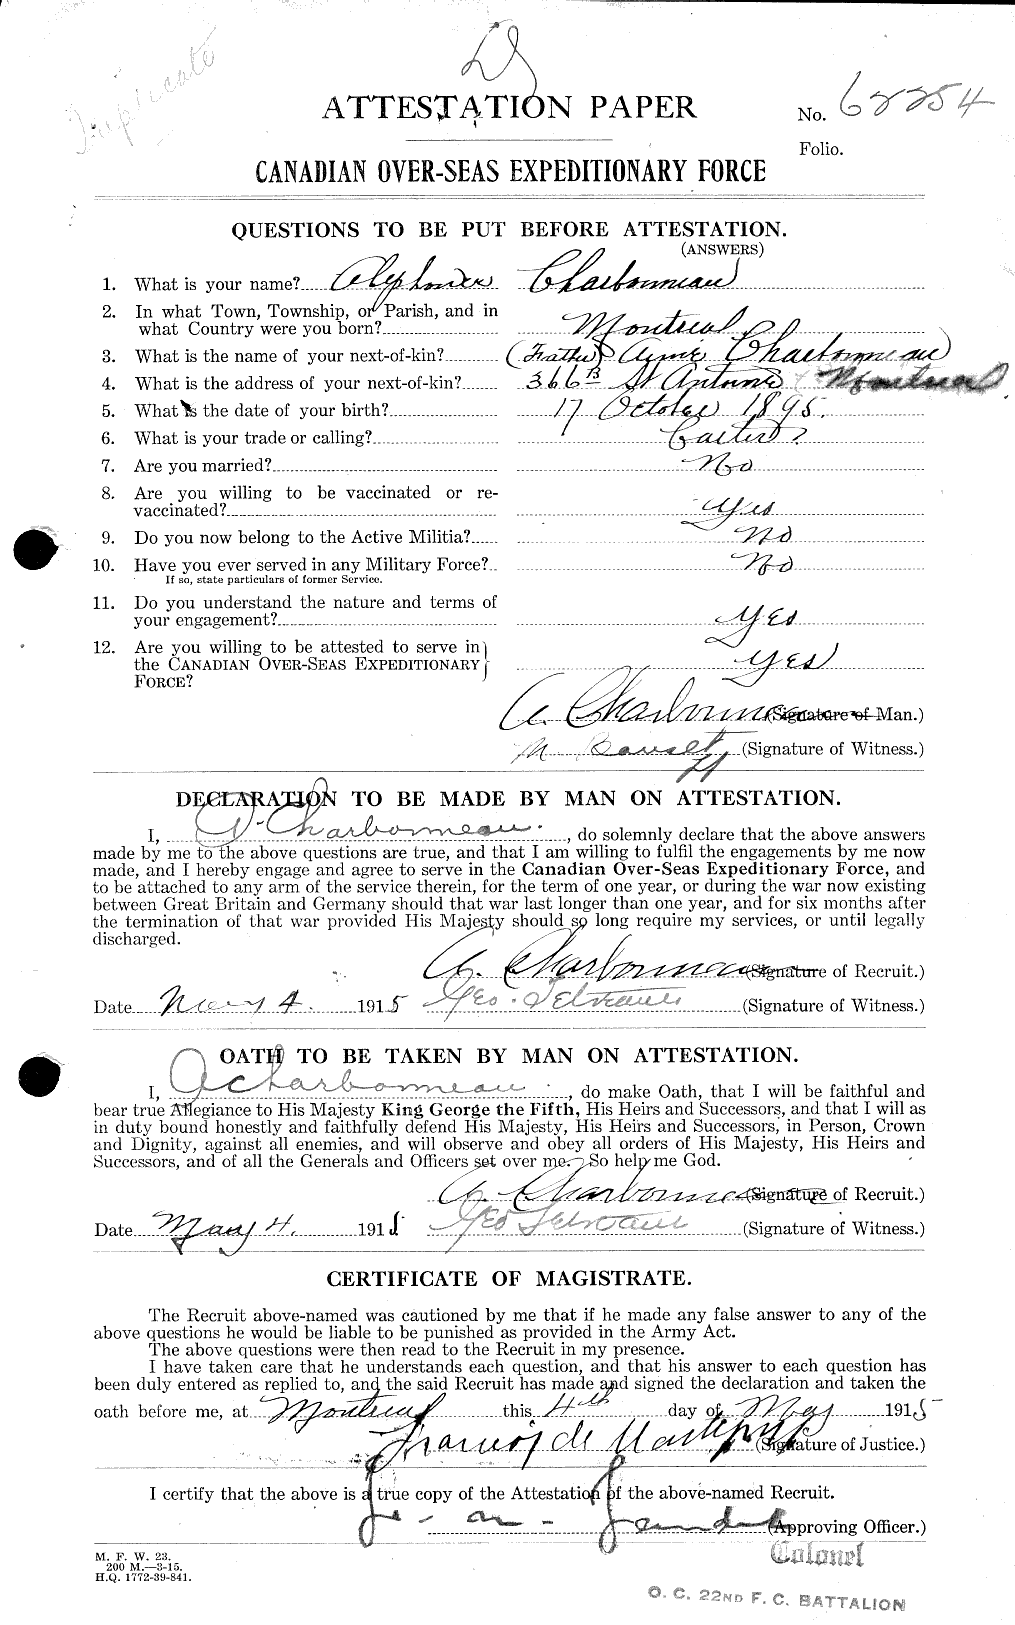 Personnel Records of the First World War - CEF 015120a